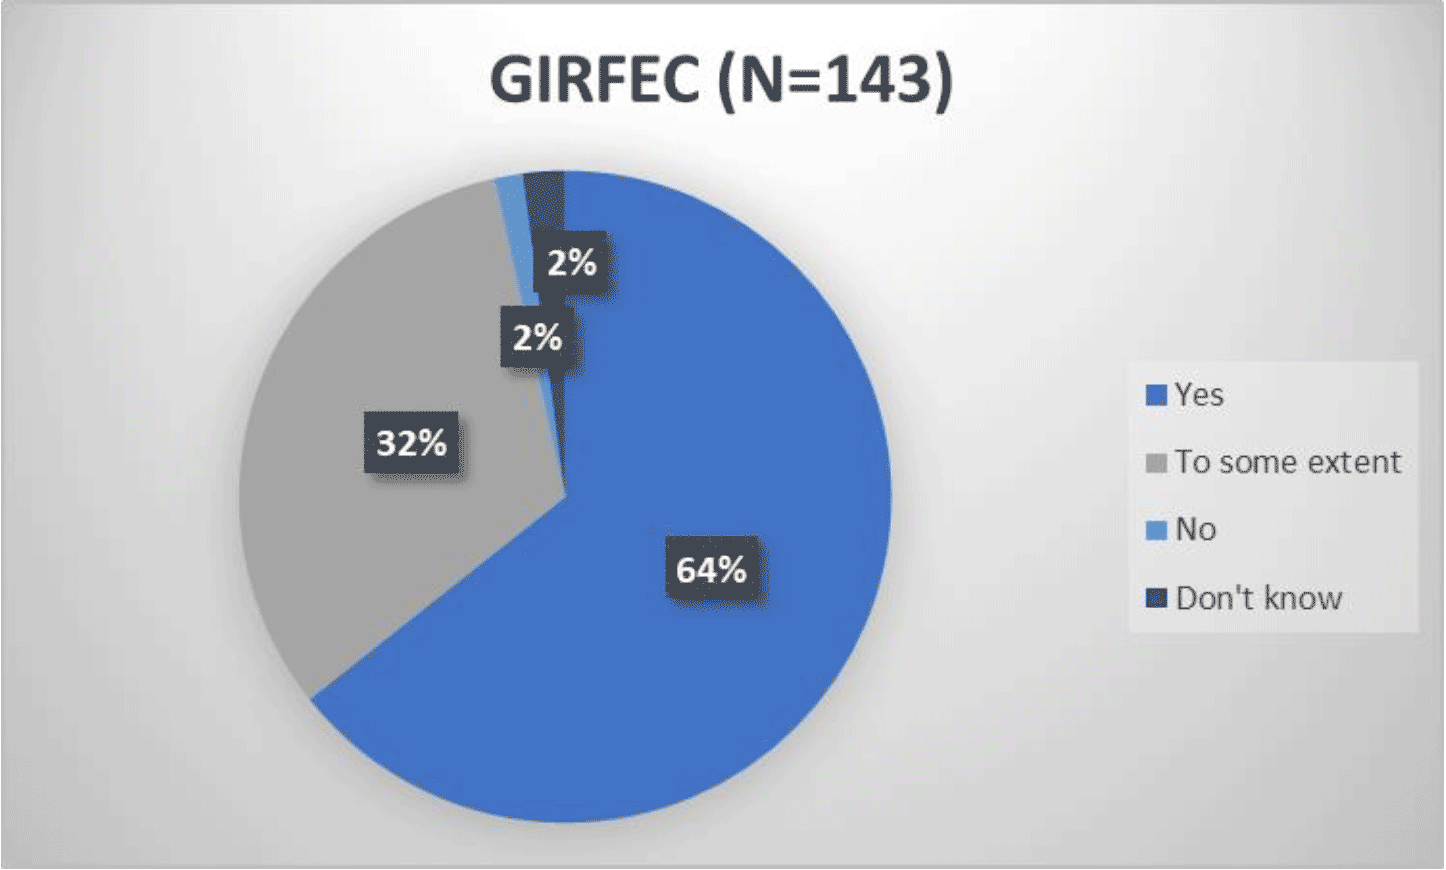 Pie chart showing responses to whether the guidance is integrated with the GIRFEC practice model:
Yes 64%
To some extent 32%
No 2%
Don't know 2%